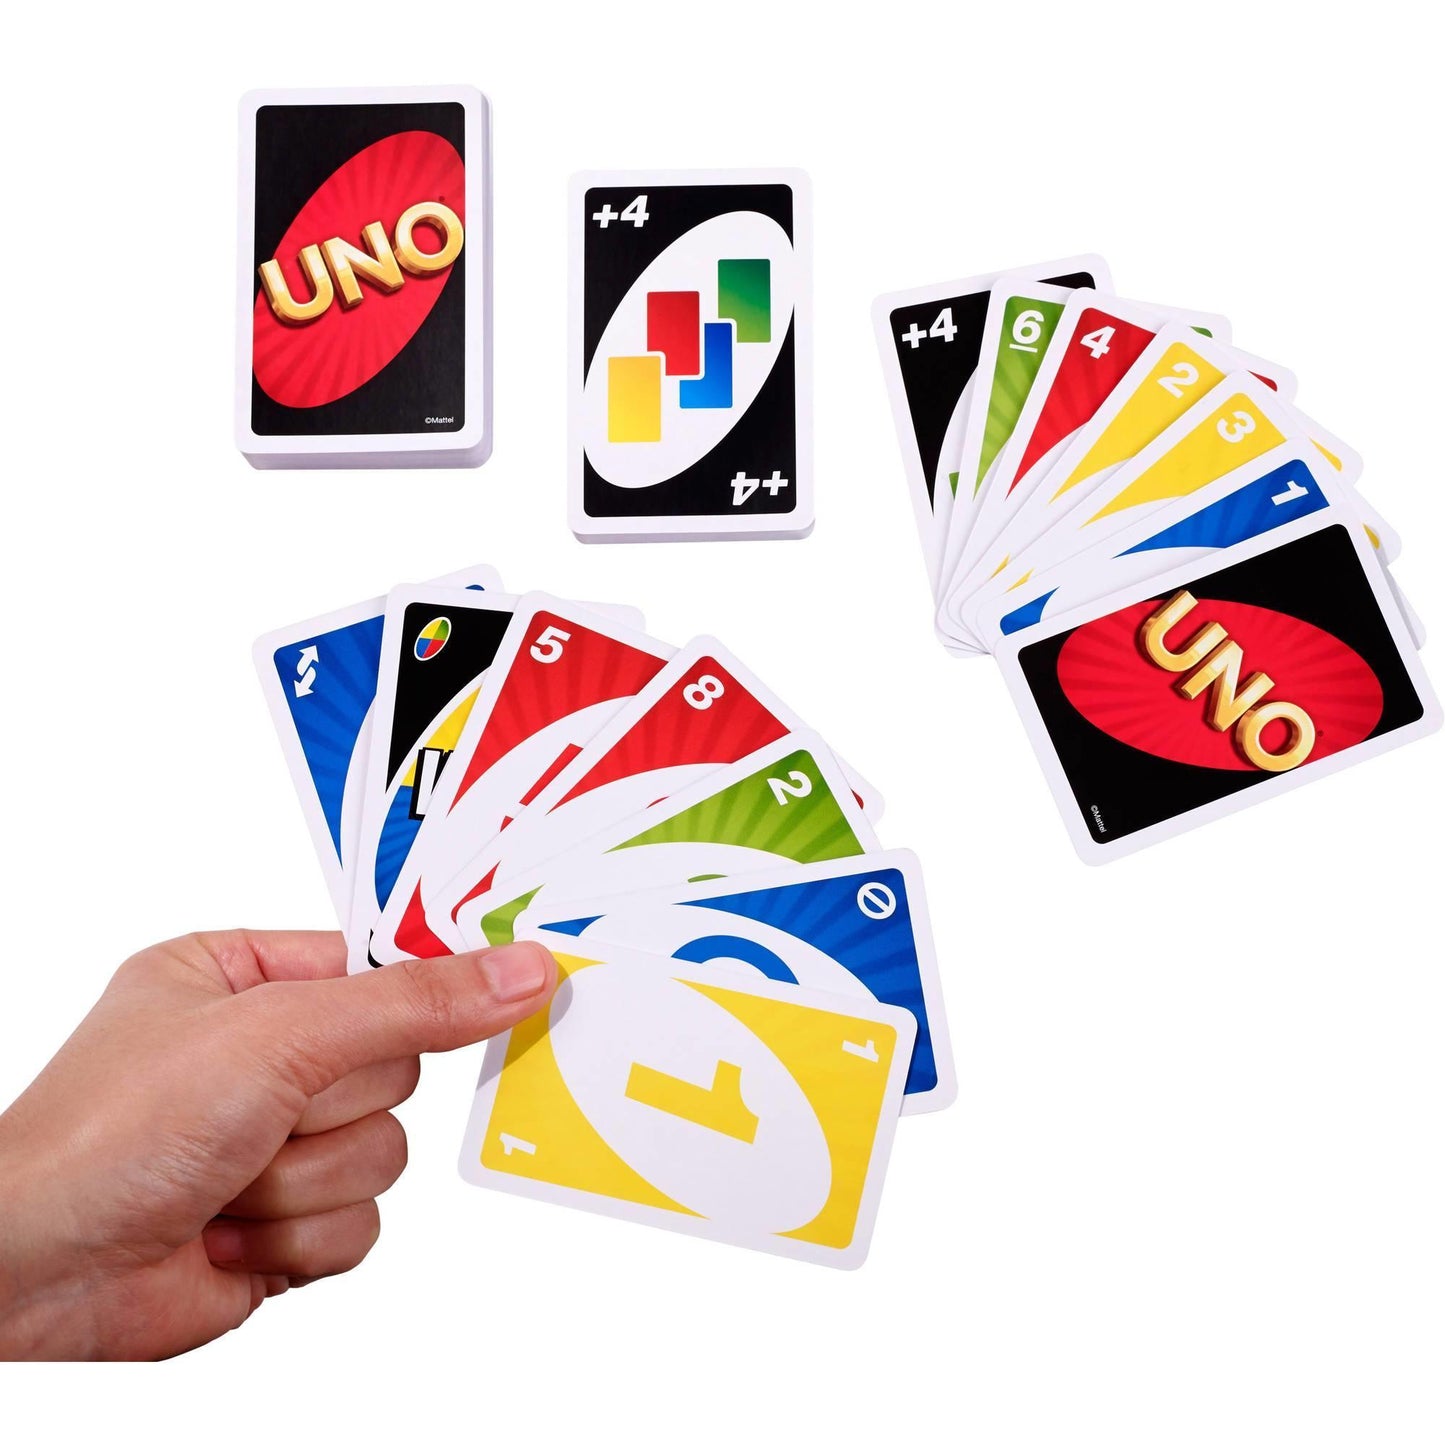 Uno - Family Games - Hugs For Kids